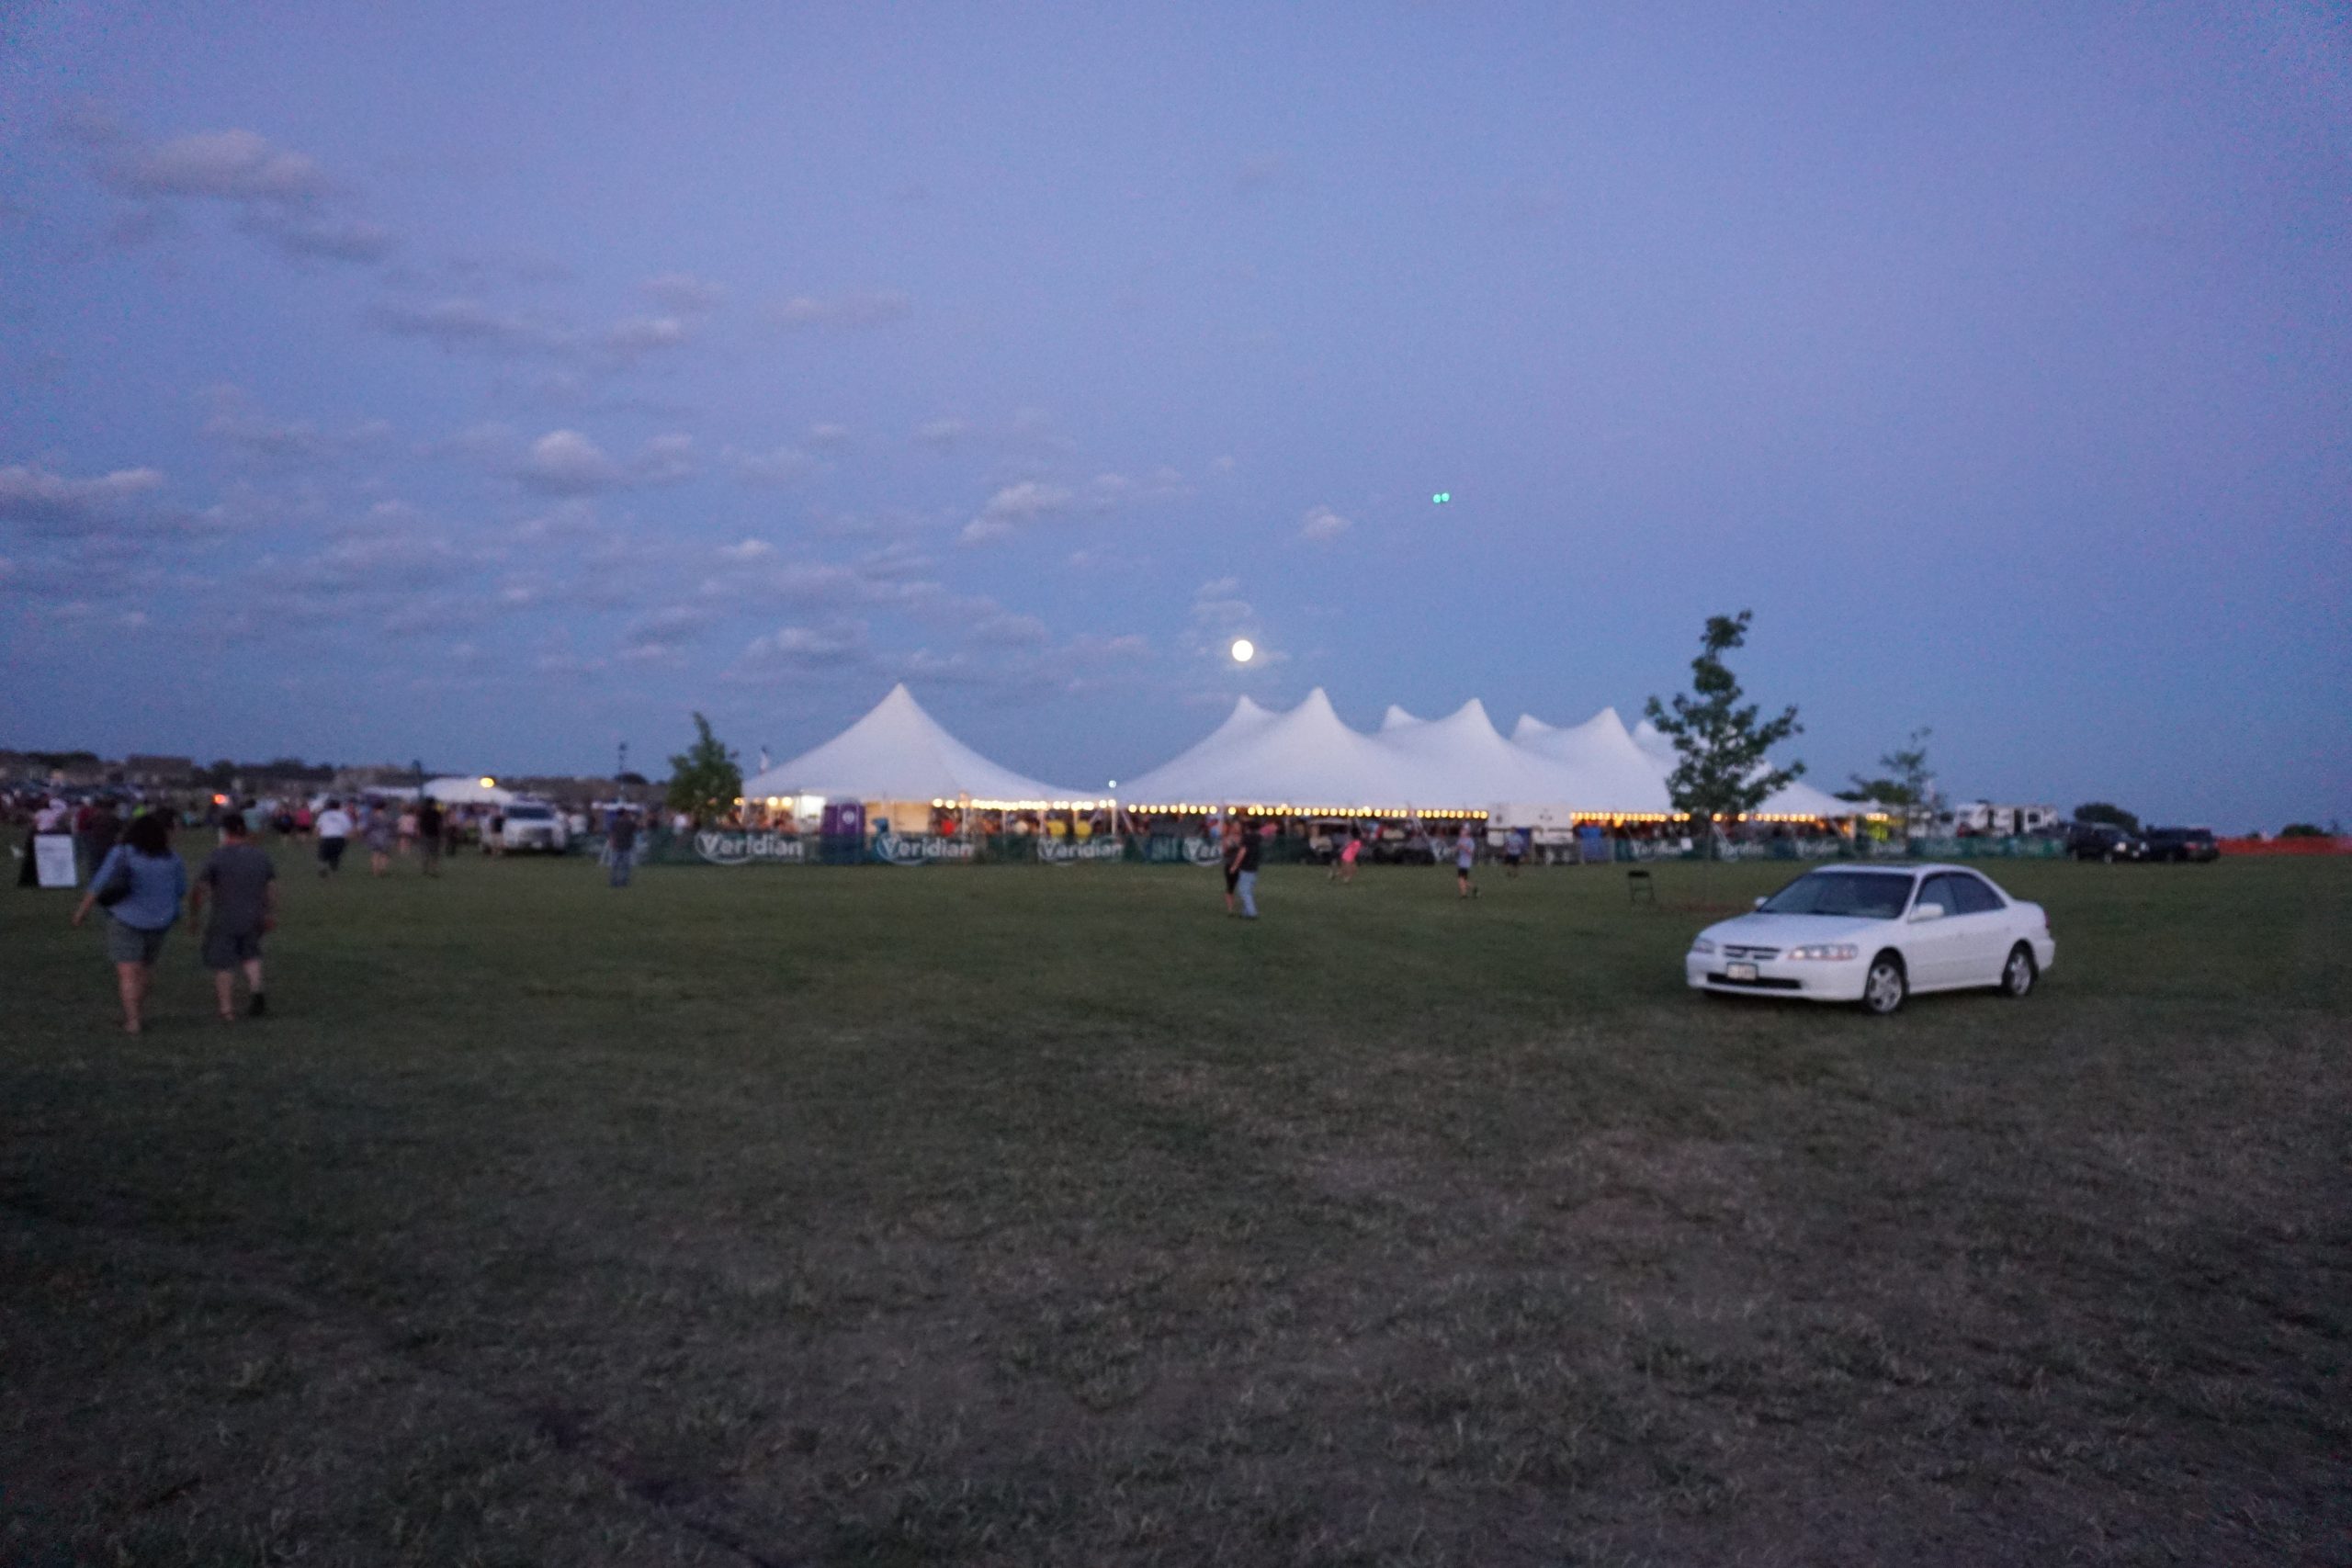 Tents at night at Blues and BBQ in North Libery, Iowa